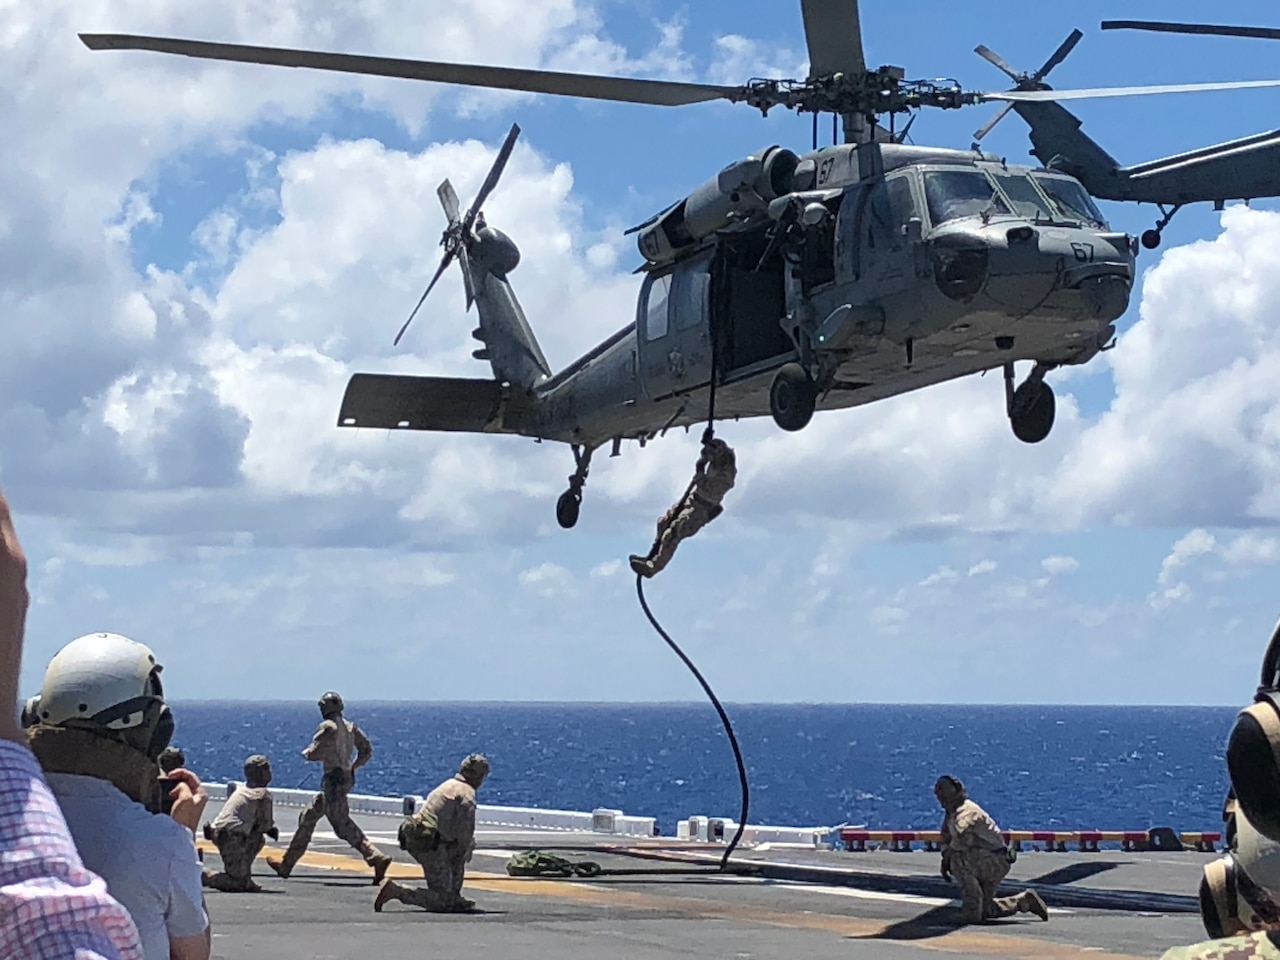 Sailors slide down a rope from a helicopter onto the flight deck of a ship.